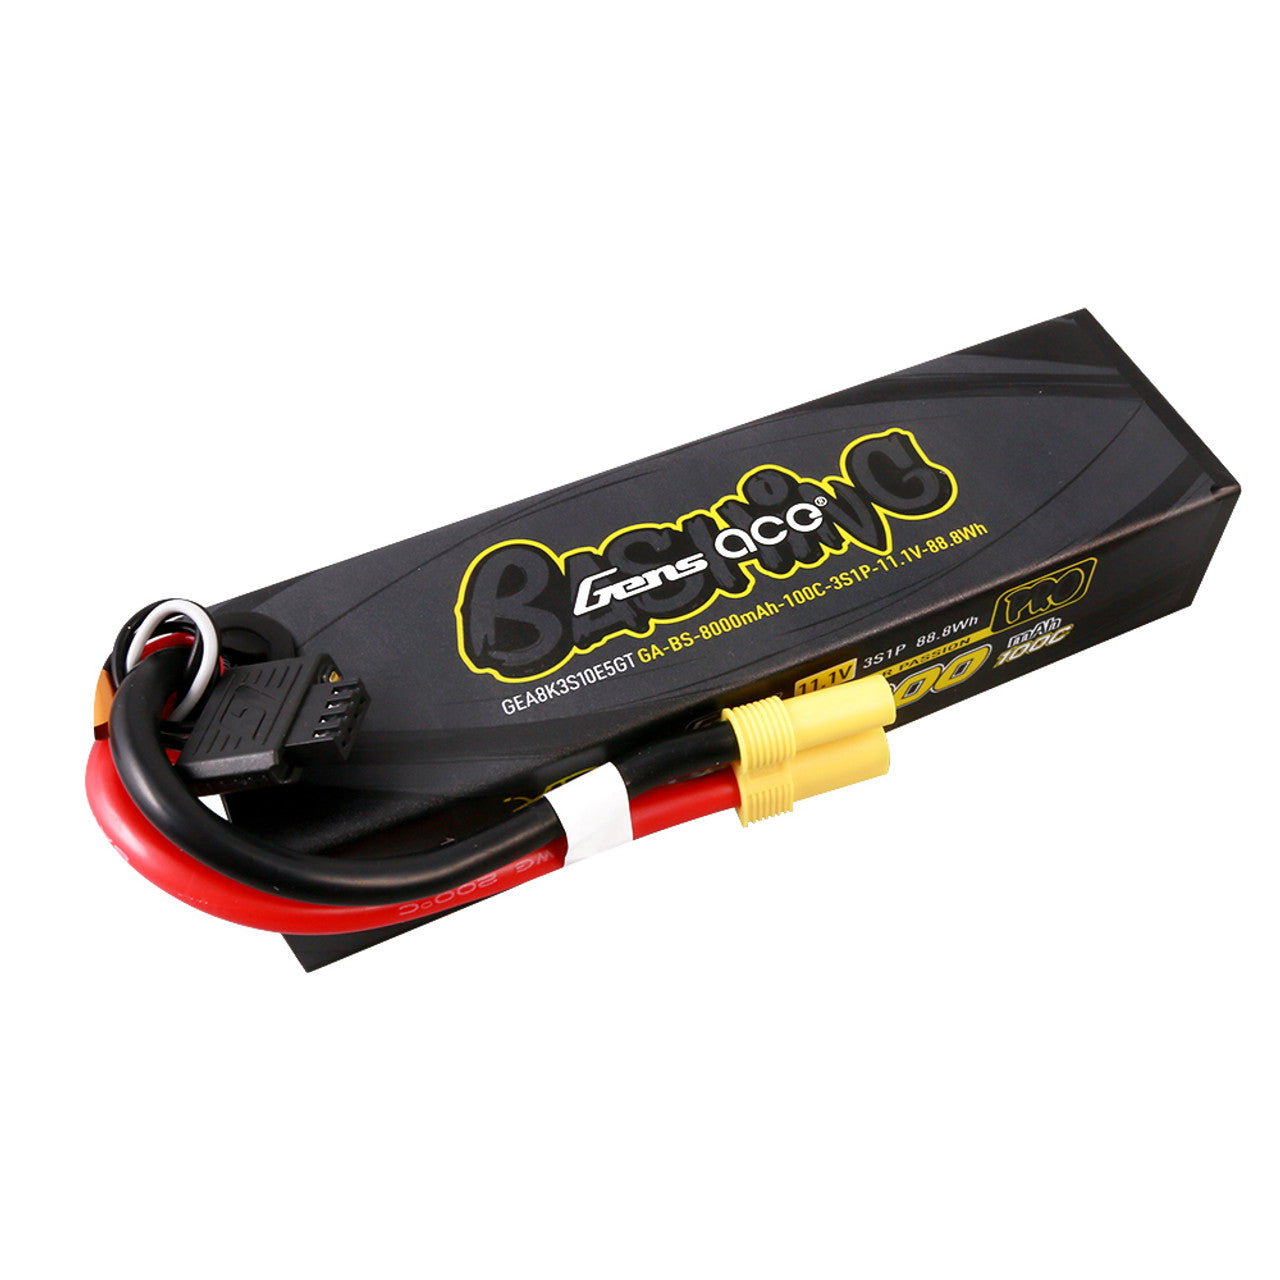 GEA8K3S10E5GT Gens Ace Bashing Pro 11.1V 100C 3S 8000mah G-Tech Lipo Battery Pack With EC5 Plug For Arrma